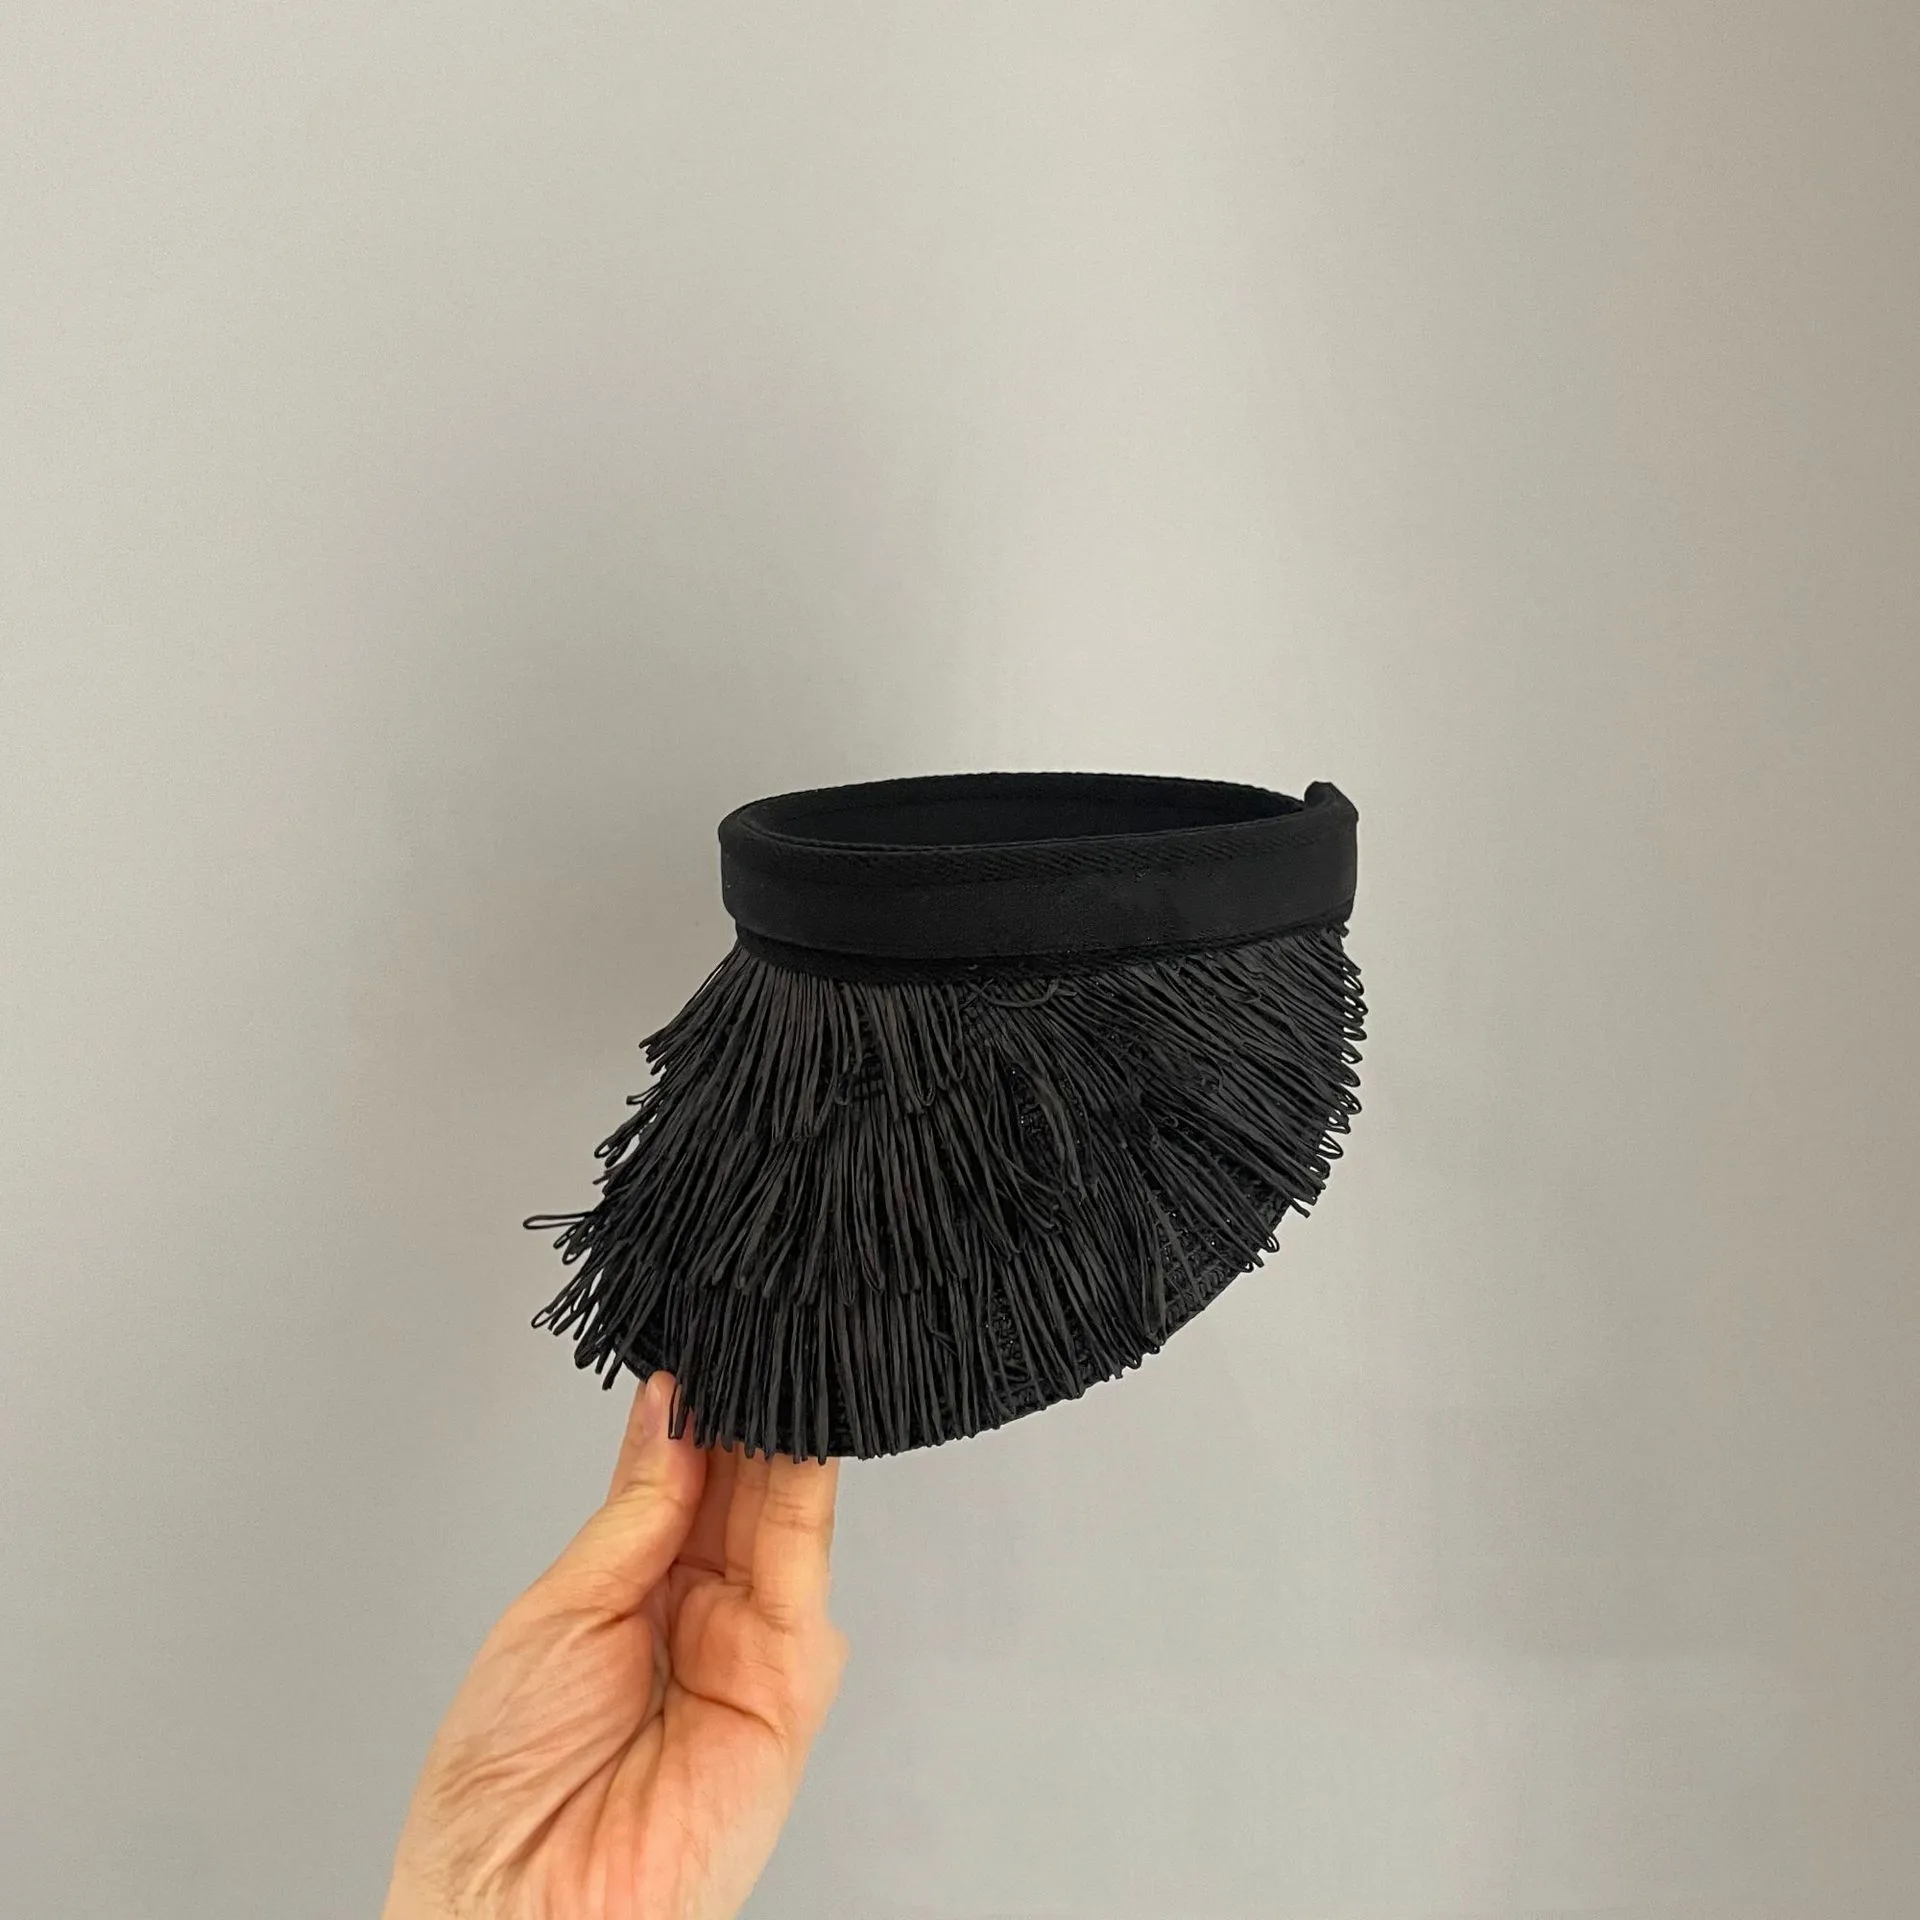 Spring/summer 2023 New Girls' Fashion and Leisure Sun-shading Hat with Large Brim and Tassel with Empty Top. enlarge